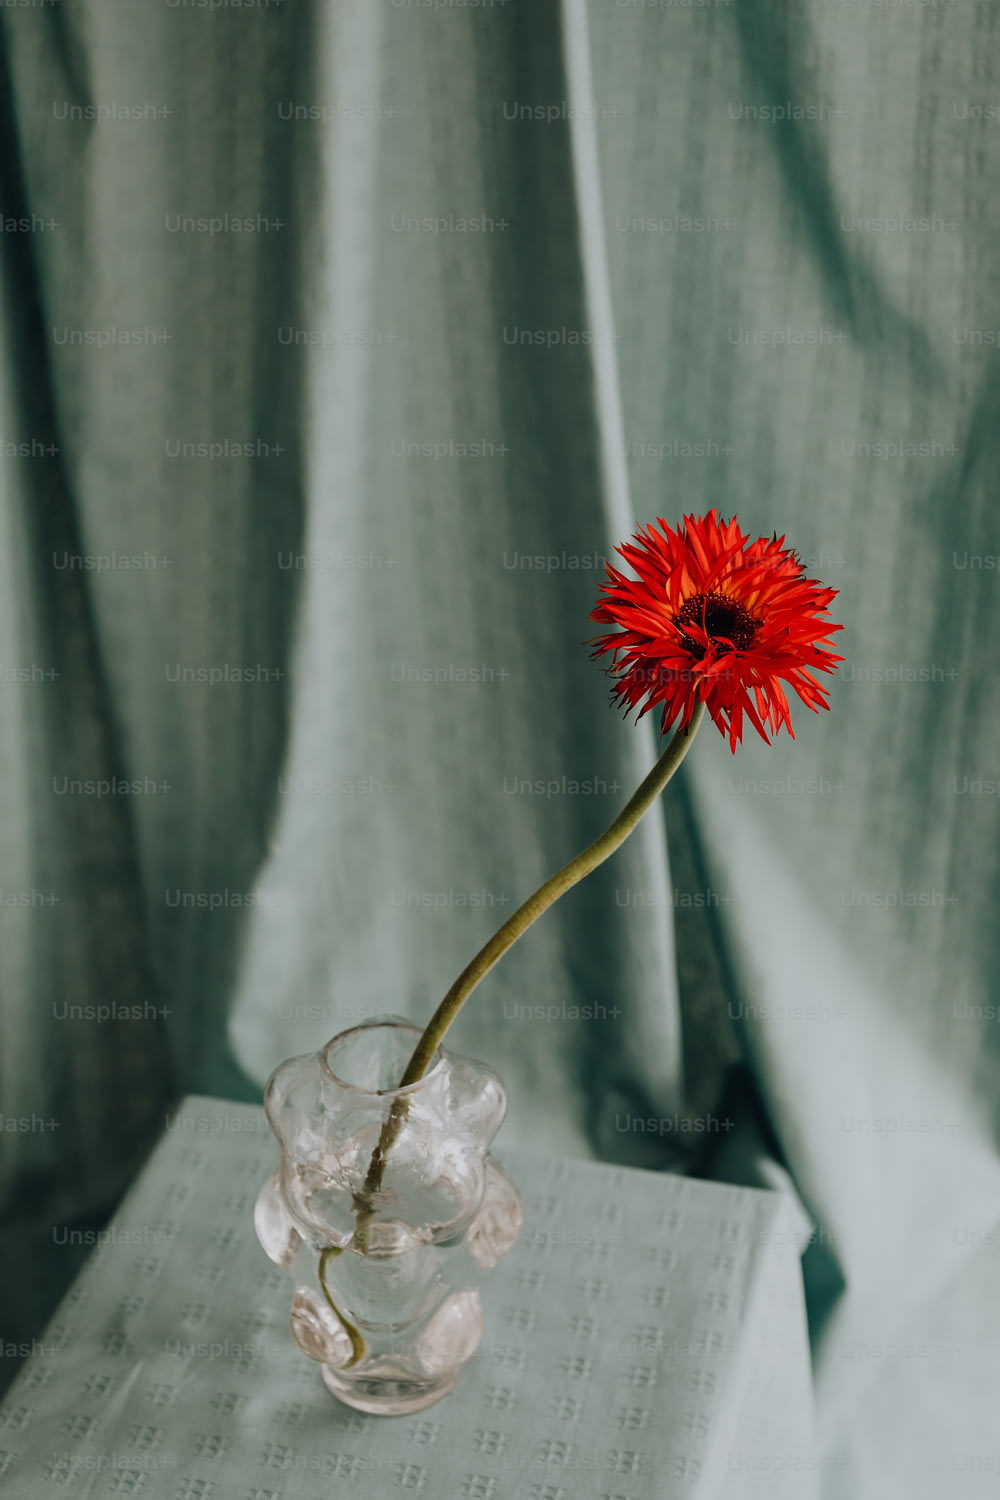 a single red flower in a glass vase